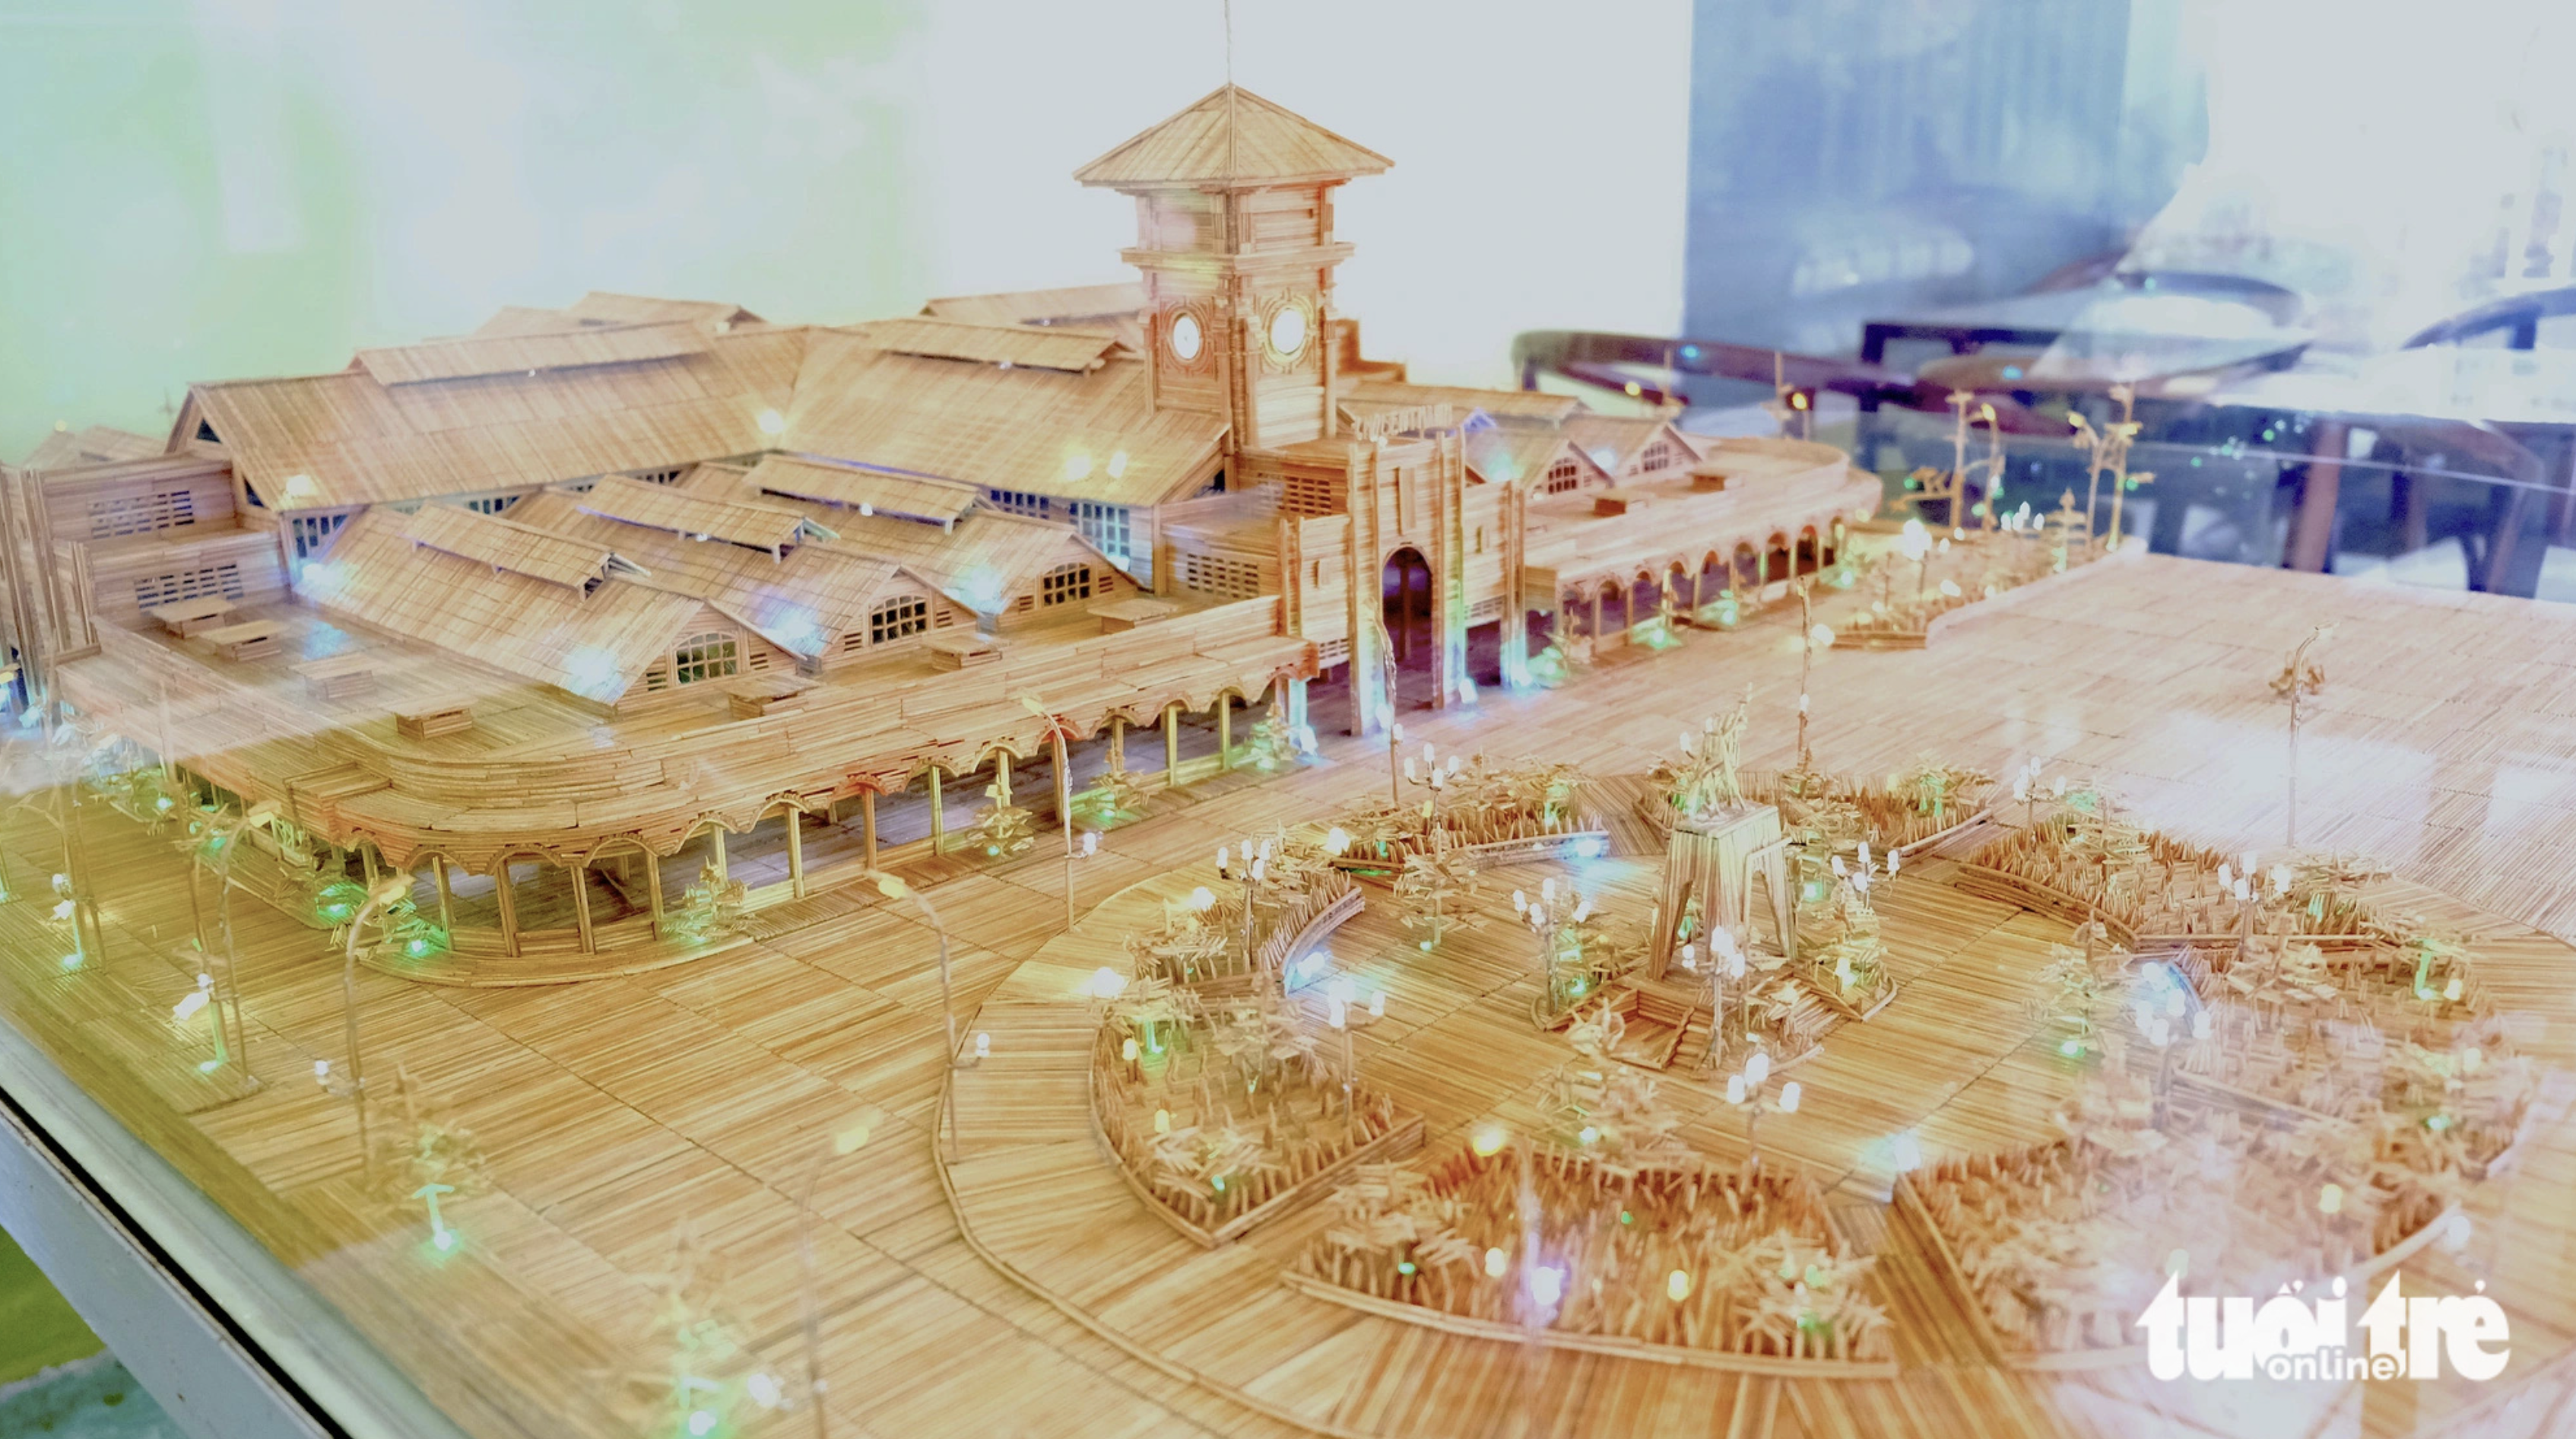 A model of the renowned Ben Thanh Market made of bamboo toothpicks. Photo: Dang Tuyet / Tuoi Tre